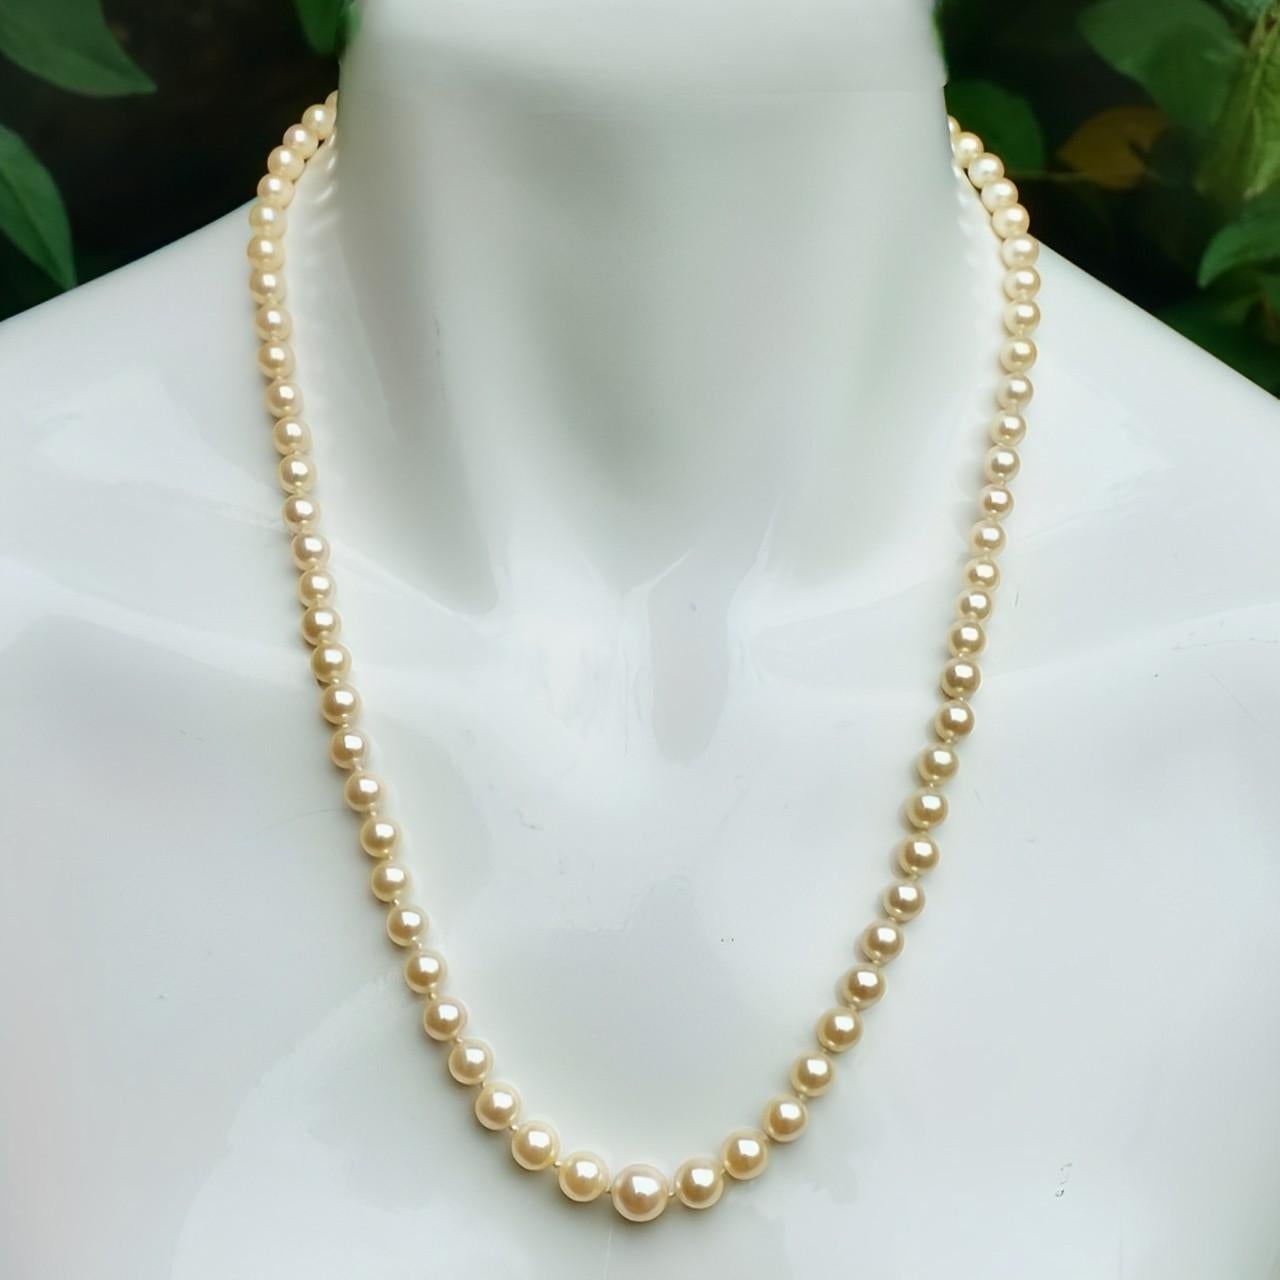 Graduated Cream Cultured Pearl Necklace with 9K Gold and Cultured Pearl Clasp For Sale 2